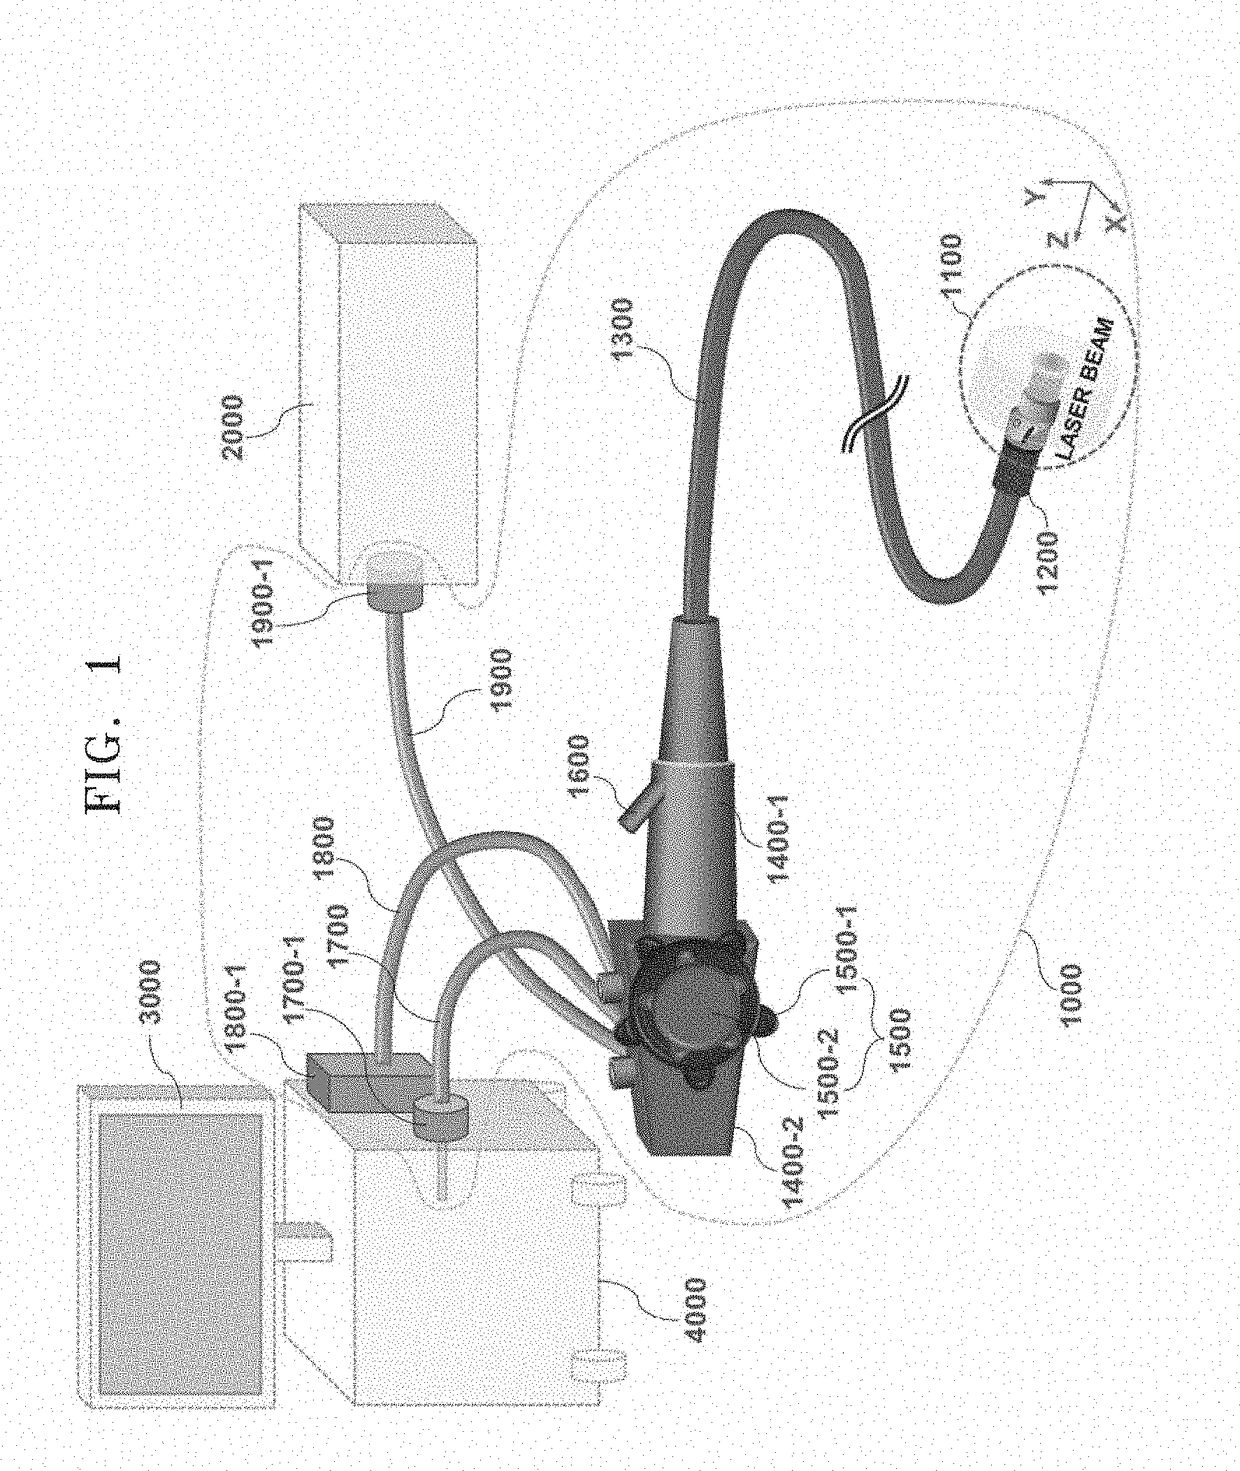 Radial array transducer-based photoacoustic and ultrasonic endoscopy system